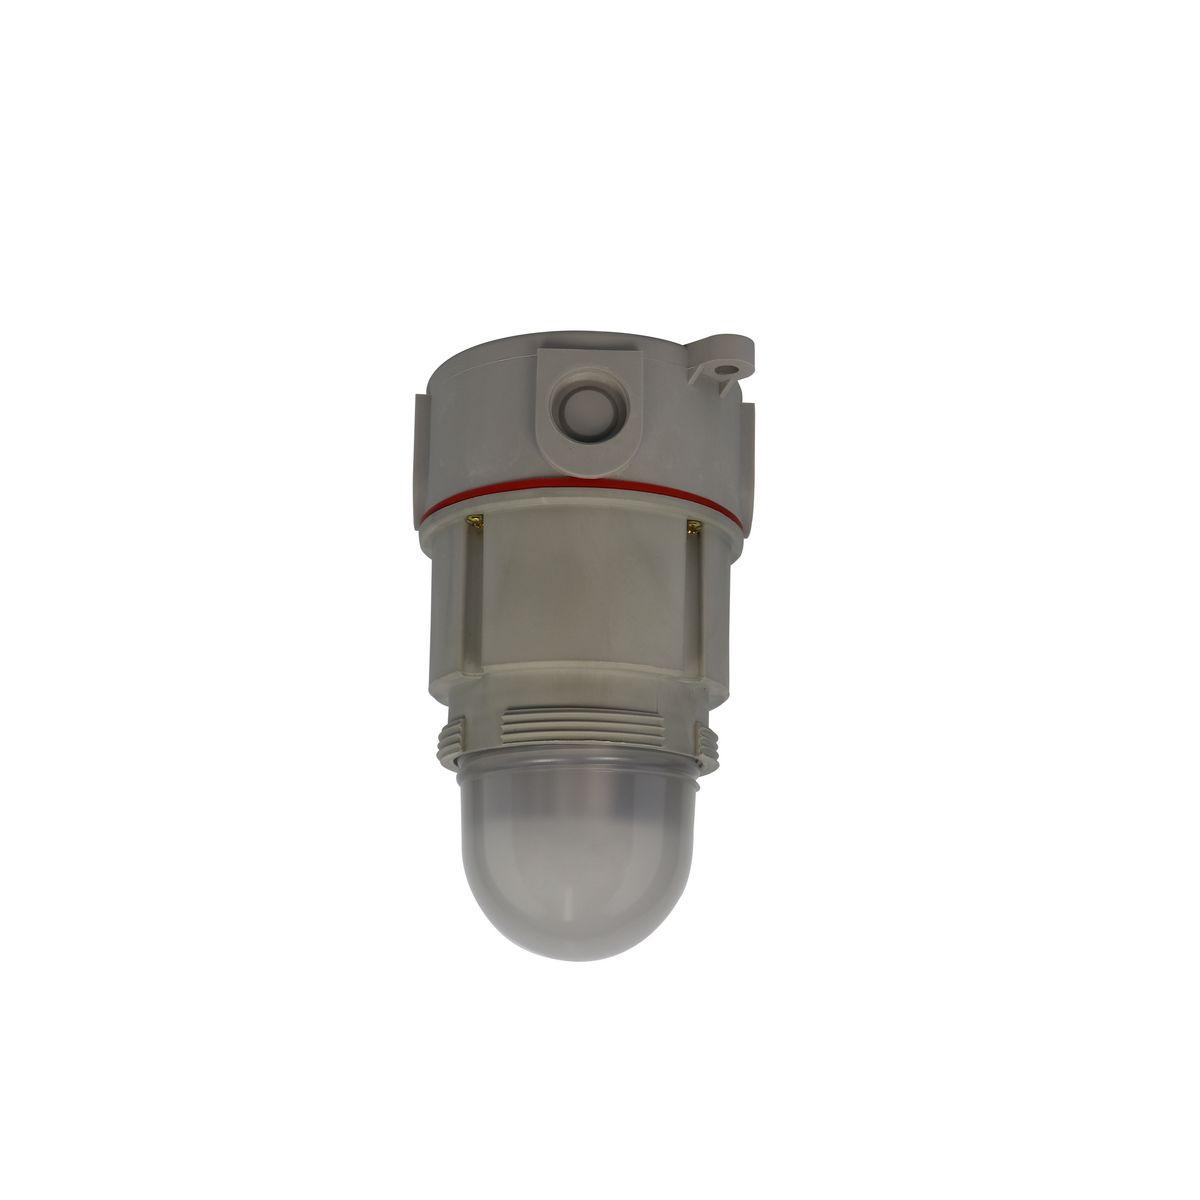 Hubbell NVL230X2N NVL Series Non-Metallic Corrosion Resistant Hazardous Location LED Fixture, 3/4" Ceiling Mount  ; Energy and labor-saving LED ; High Efﬁcacy (lumens per watt) ; Compact Size ; Type 3, 4, & 4X Rated ; IP66 Marine Rated ; ABS Approved ; Resists corrosive ef